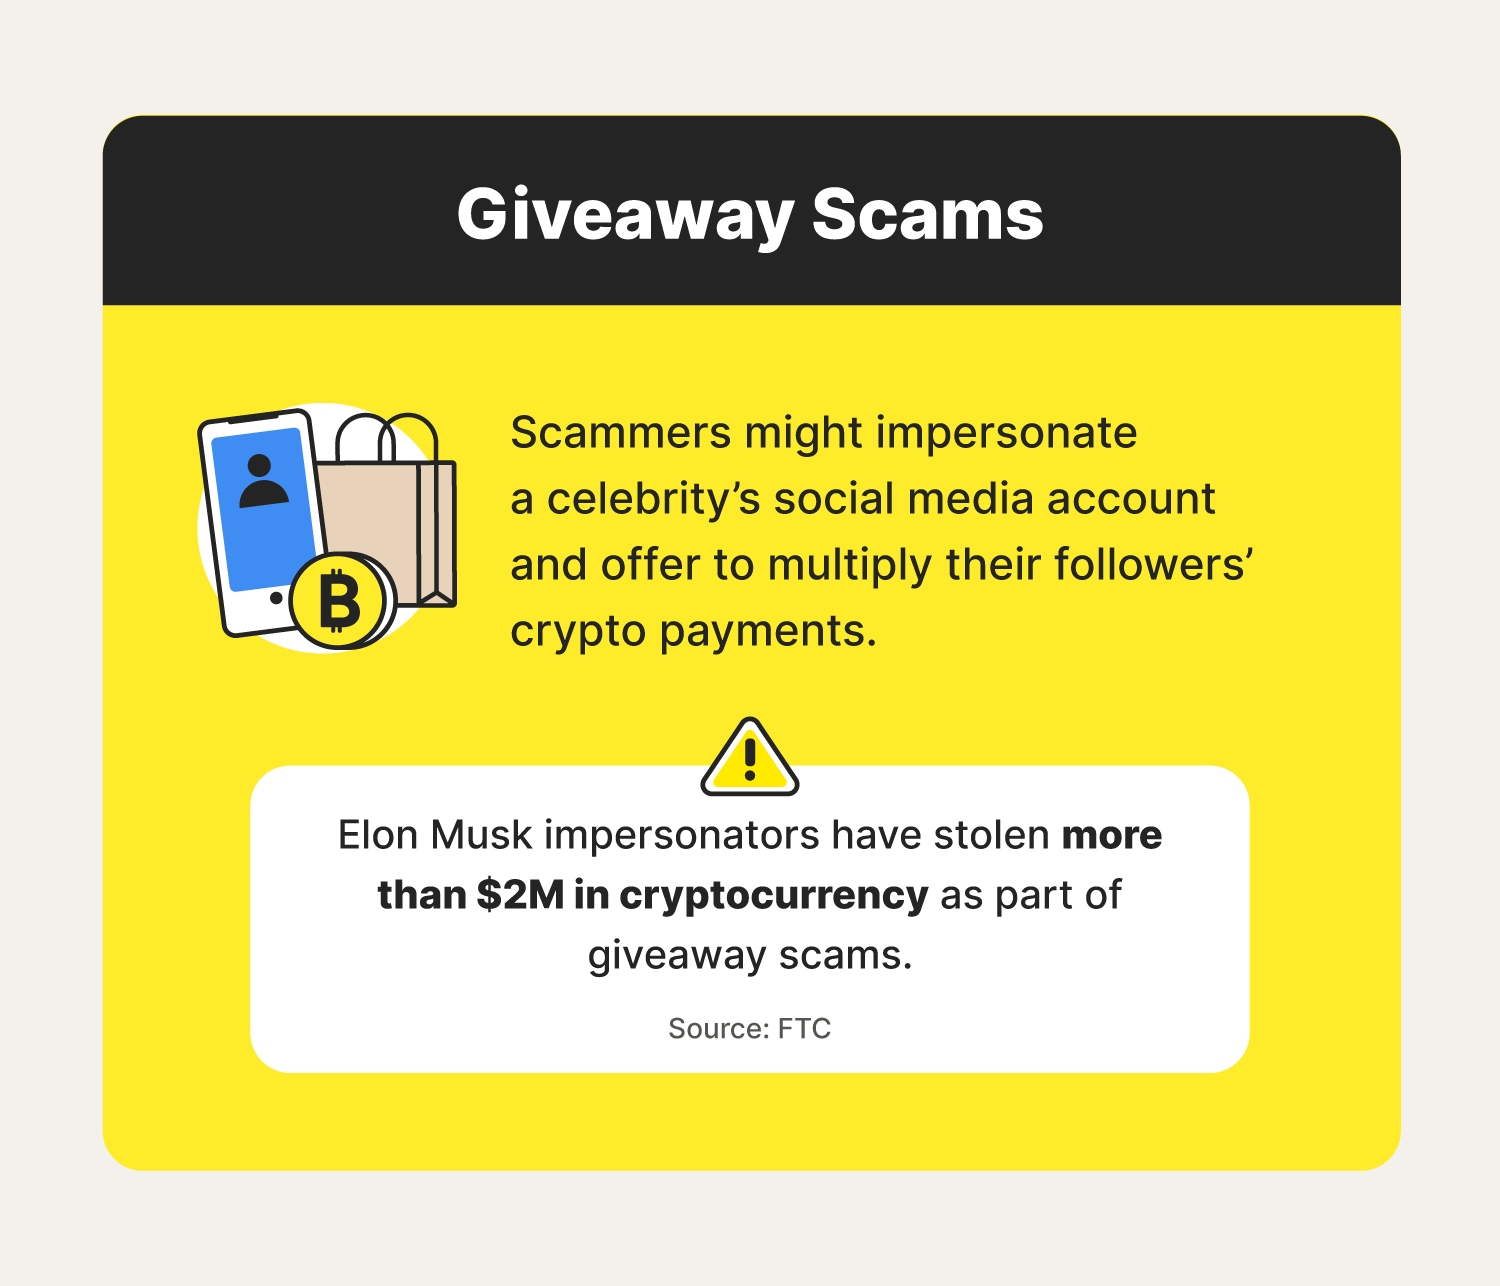 Giveaway scams